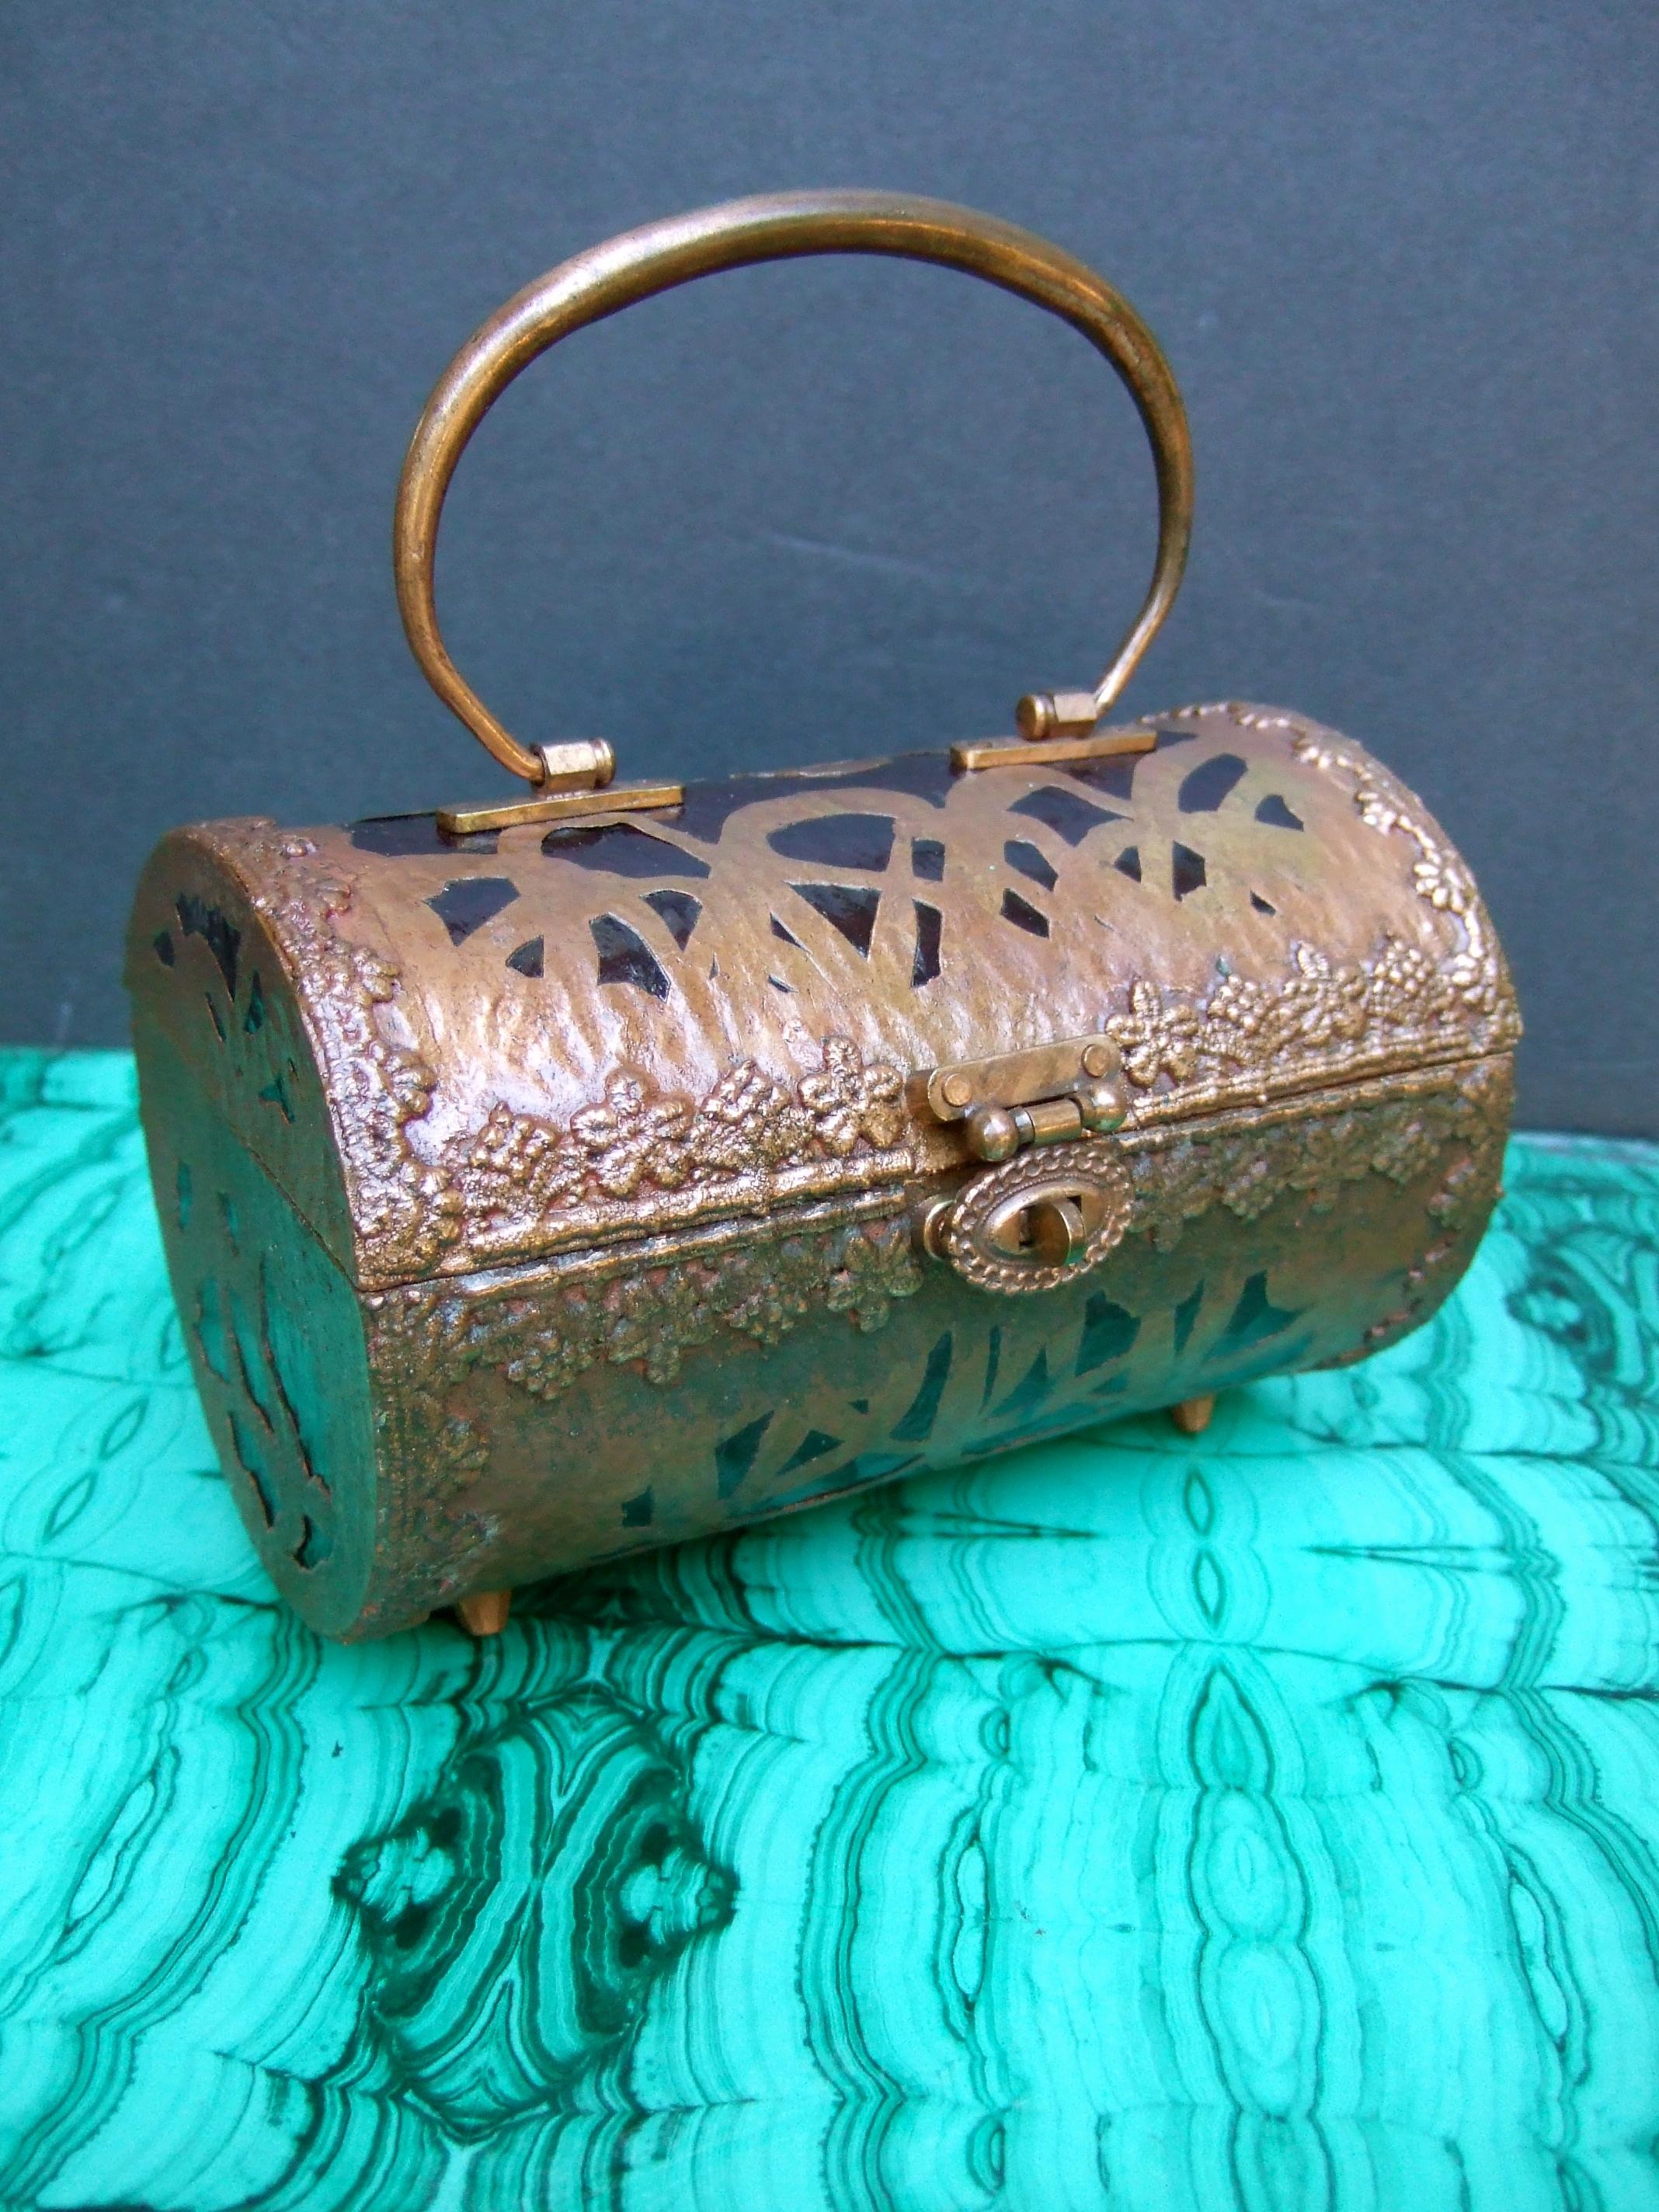 Saks Fifth Avenue Rare copper metal lucite cylinder handbag c 1960s
The unique barrel shaped handbag is adorned with hammered copper metal foliage designs in the style of the early 20th century arts & crafts movement  
The border edges are